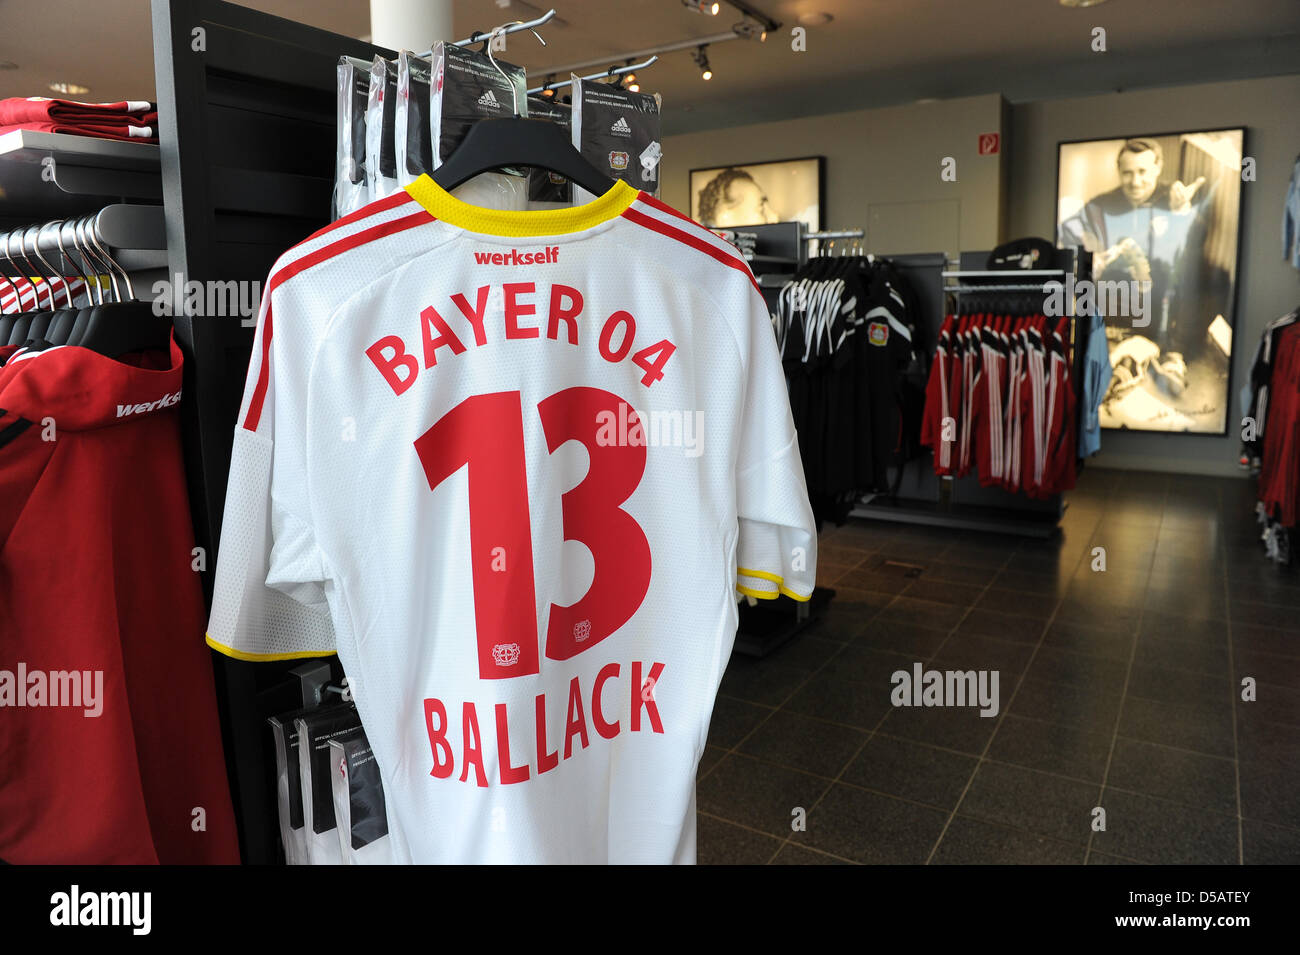 The jersey of the former and newly returned player of Bayer Leverkusen,  Michael Ballack, hangs in a fan shop during the presentation of the  national team player in Leverkusen, Germany, 14 July